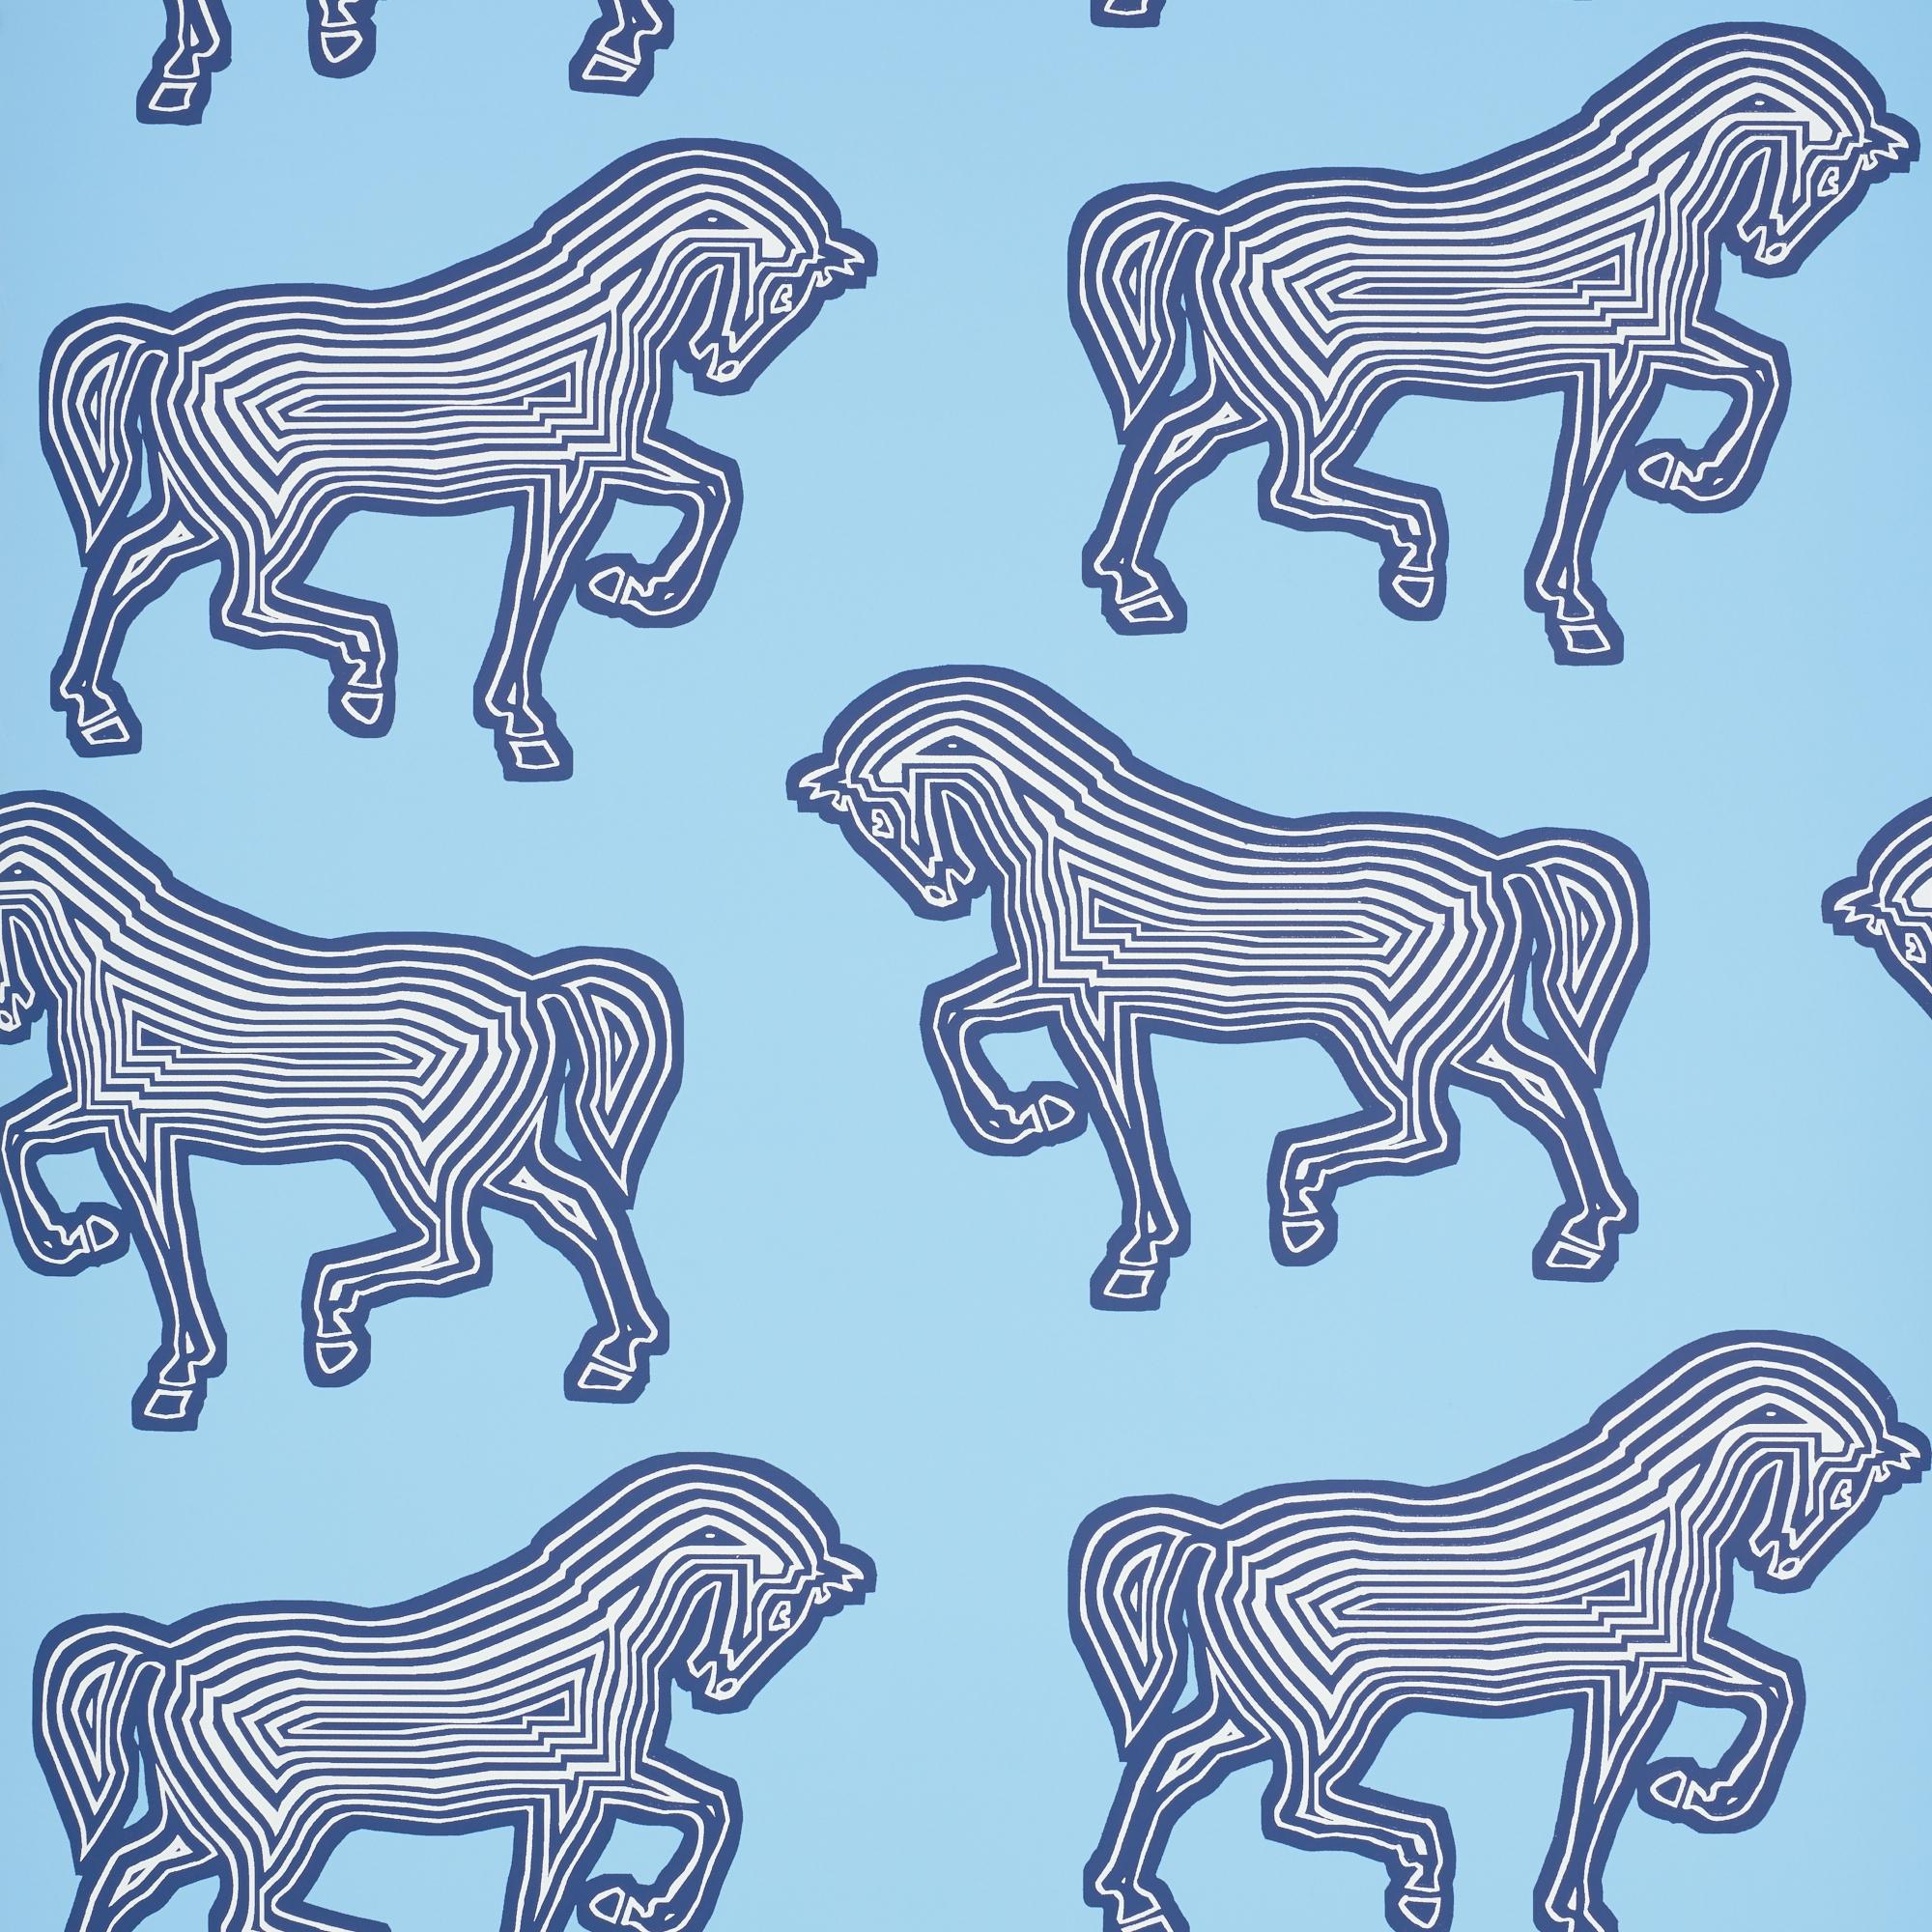 Equally at home in traditional and modern schemes, this chic, graphic pattern adds equestrian flair to any room.

Since Schumacher was founded in 1889, our family-owned company has been synonymous with style, taste, and innovation. A passion for